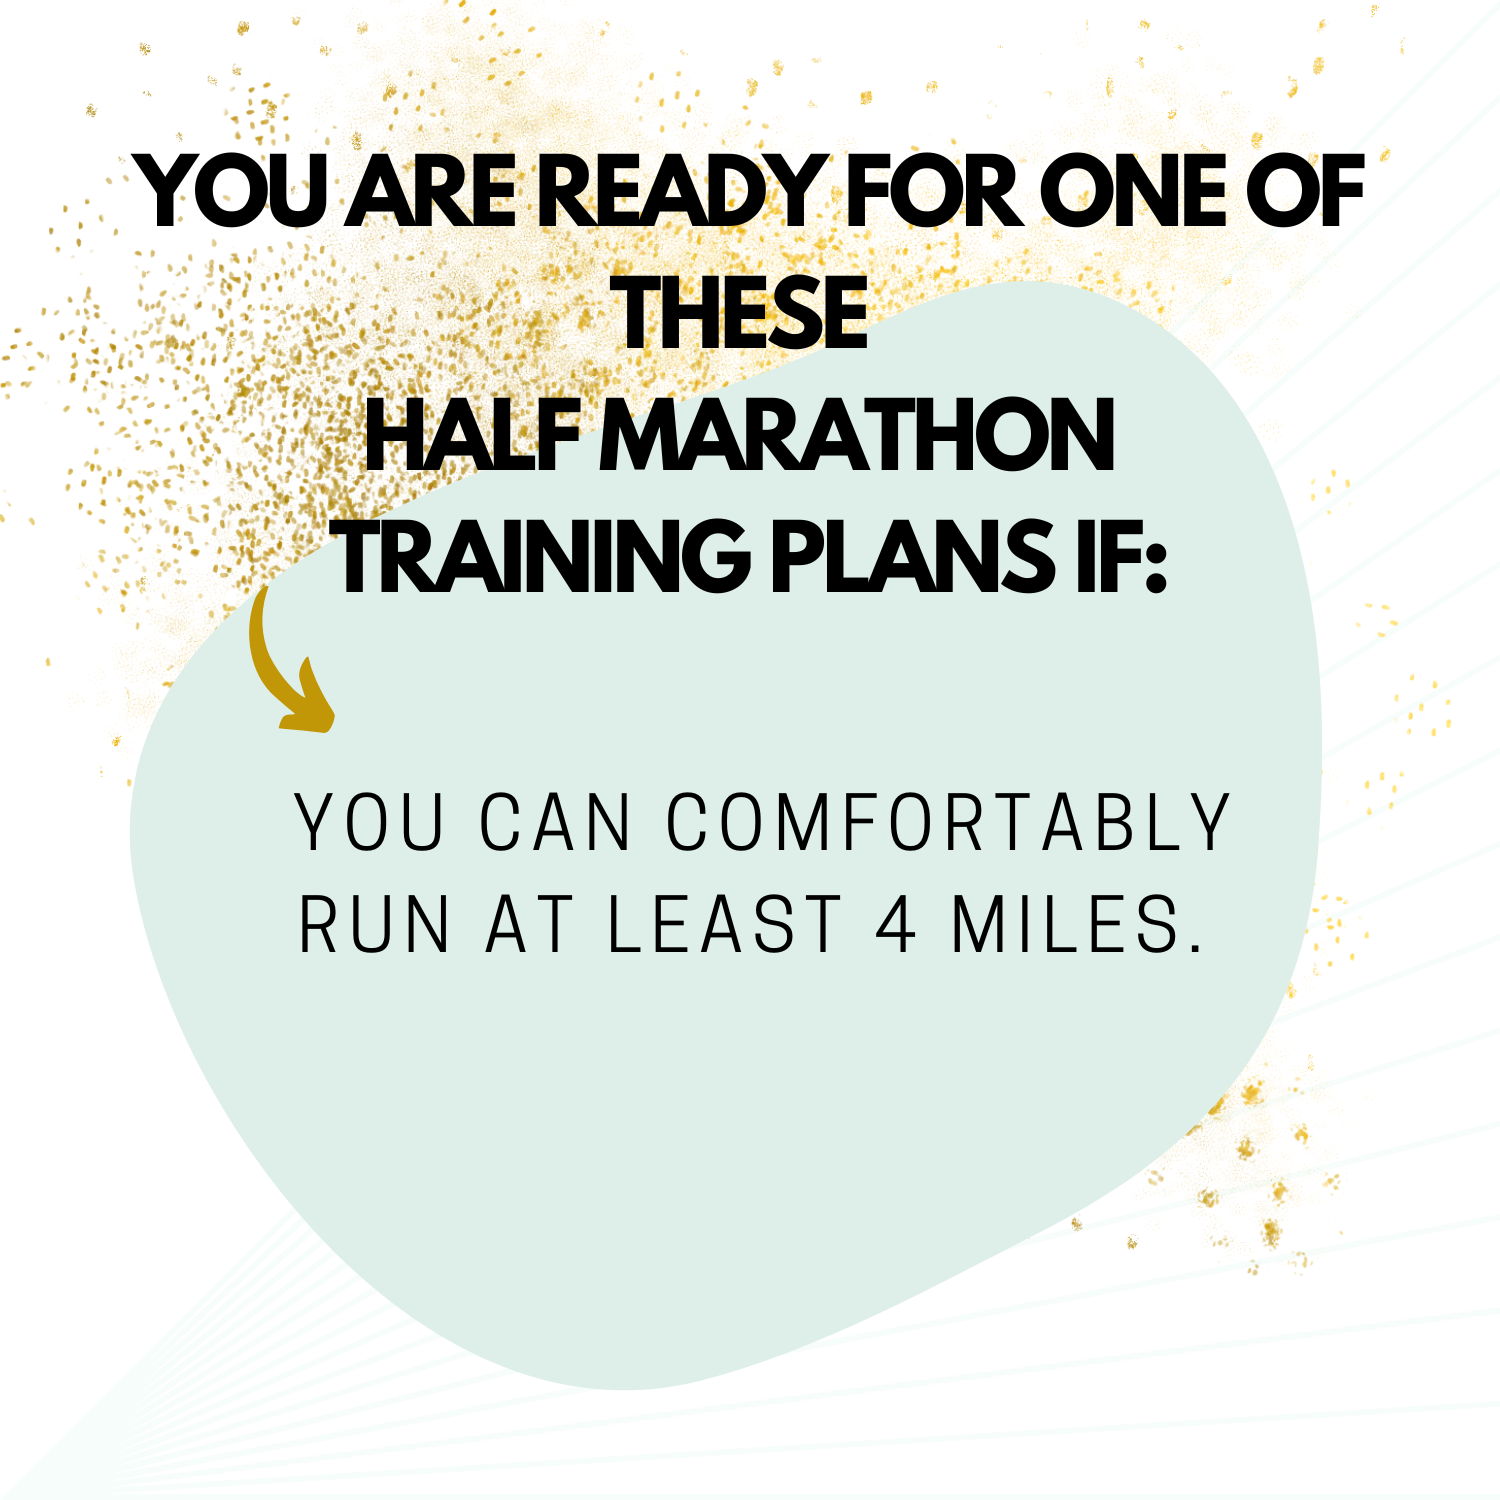 12 Week Half Marathon Training Schedule Finishing Time Goal Plans when you are ready to run